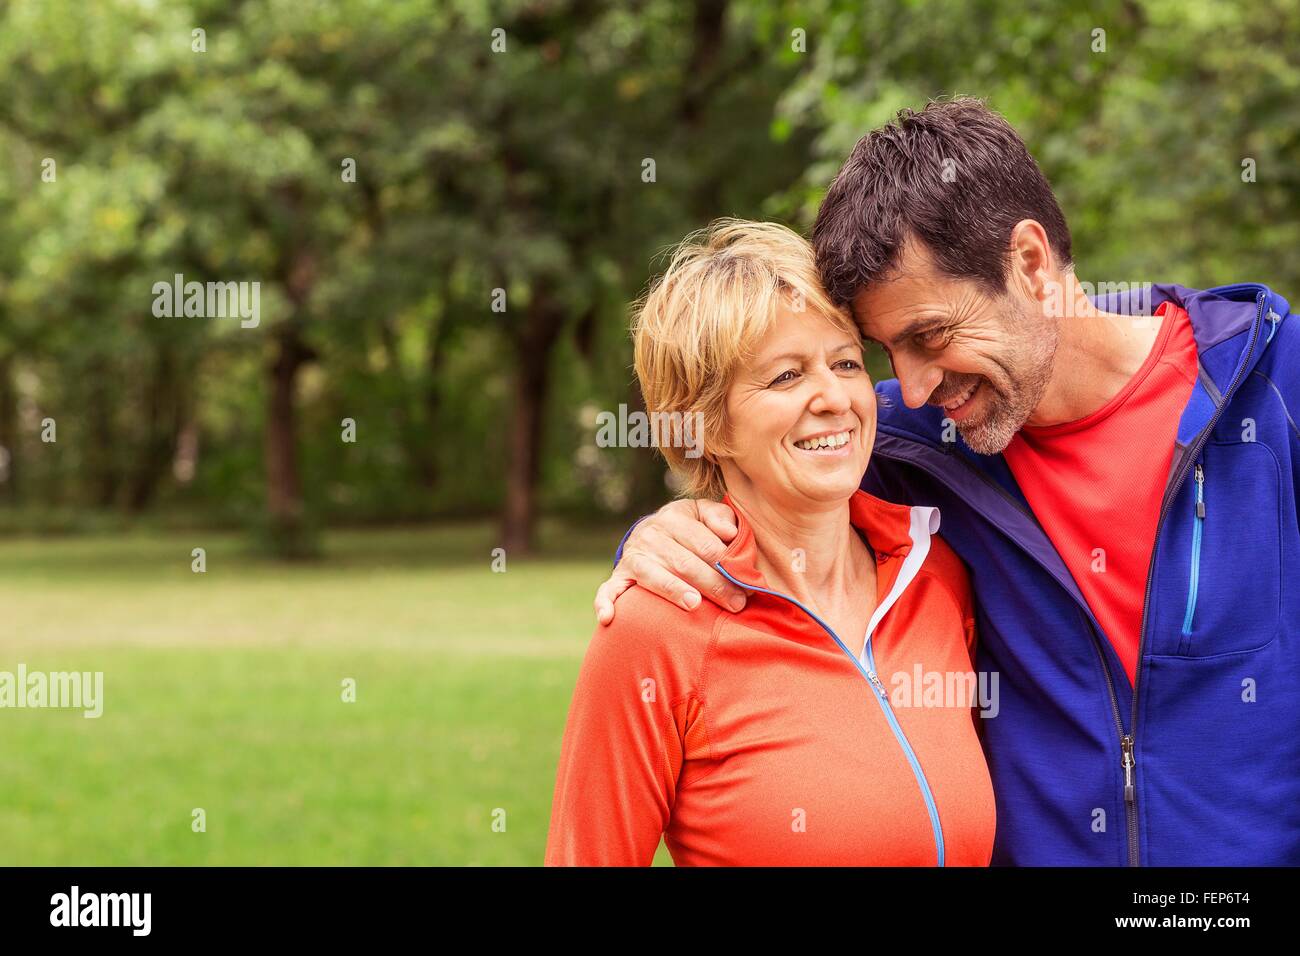 Couple wearing sports clothing, outdoors, hugging, smiling Stock Photo